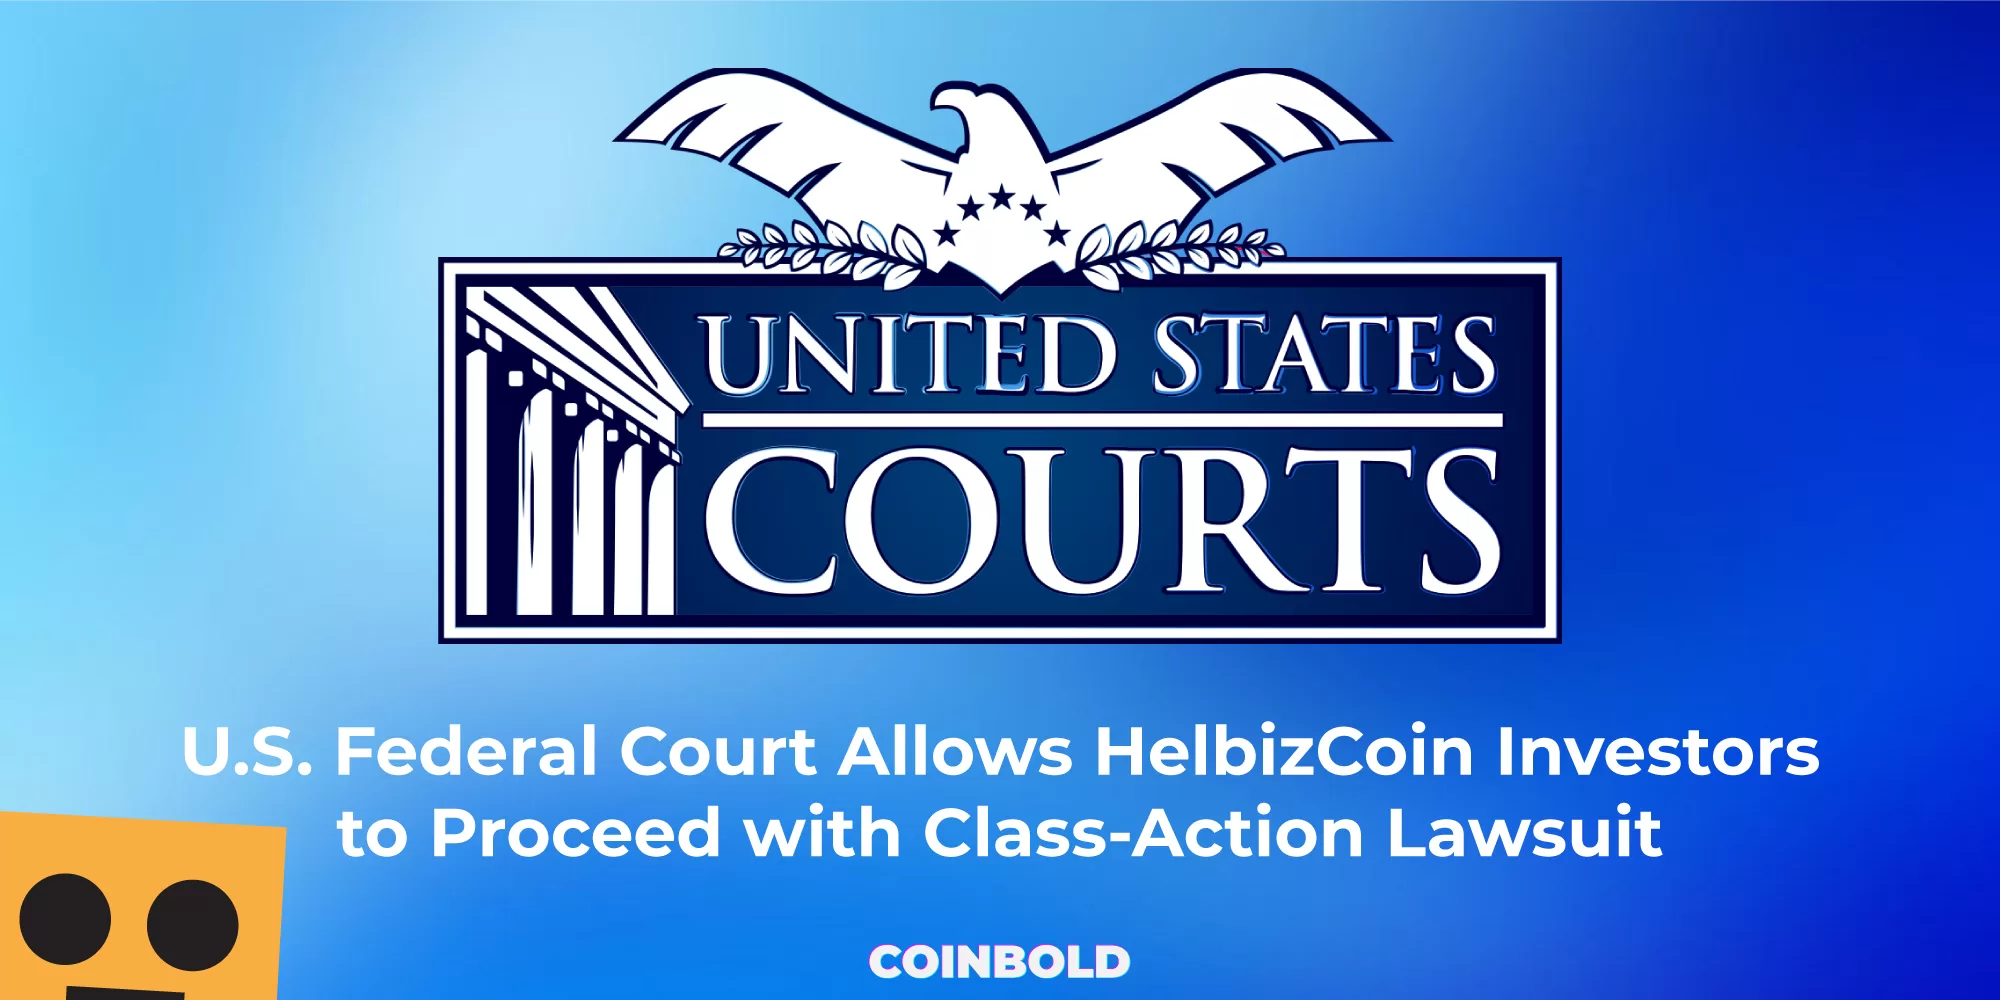 U.S. Federal Court Allows HelbizCoin Investors to Proceed with Class Action Lawsuit